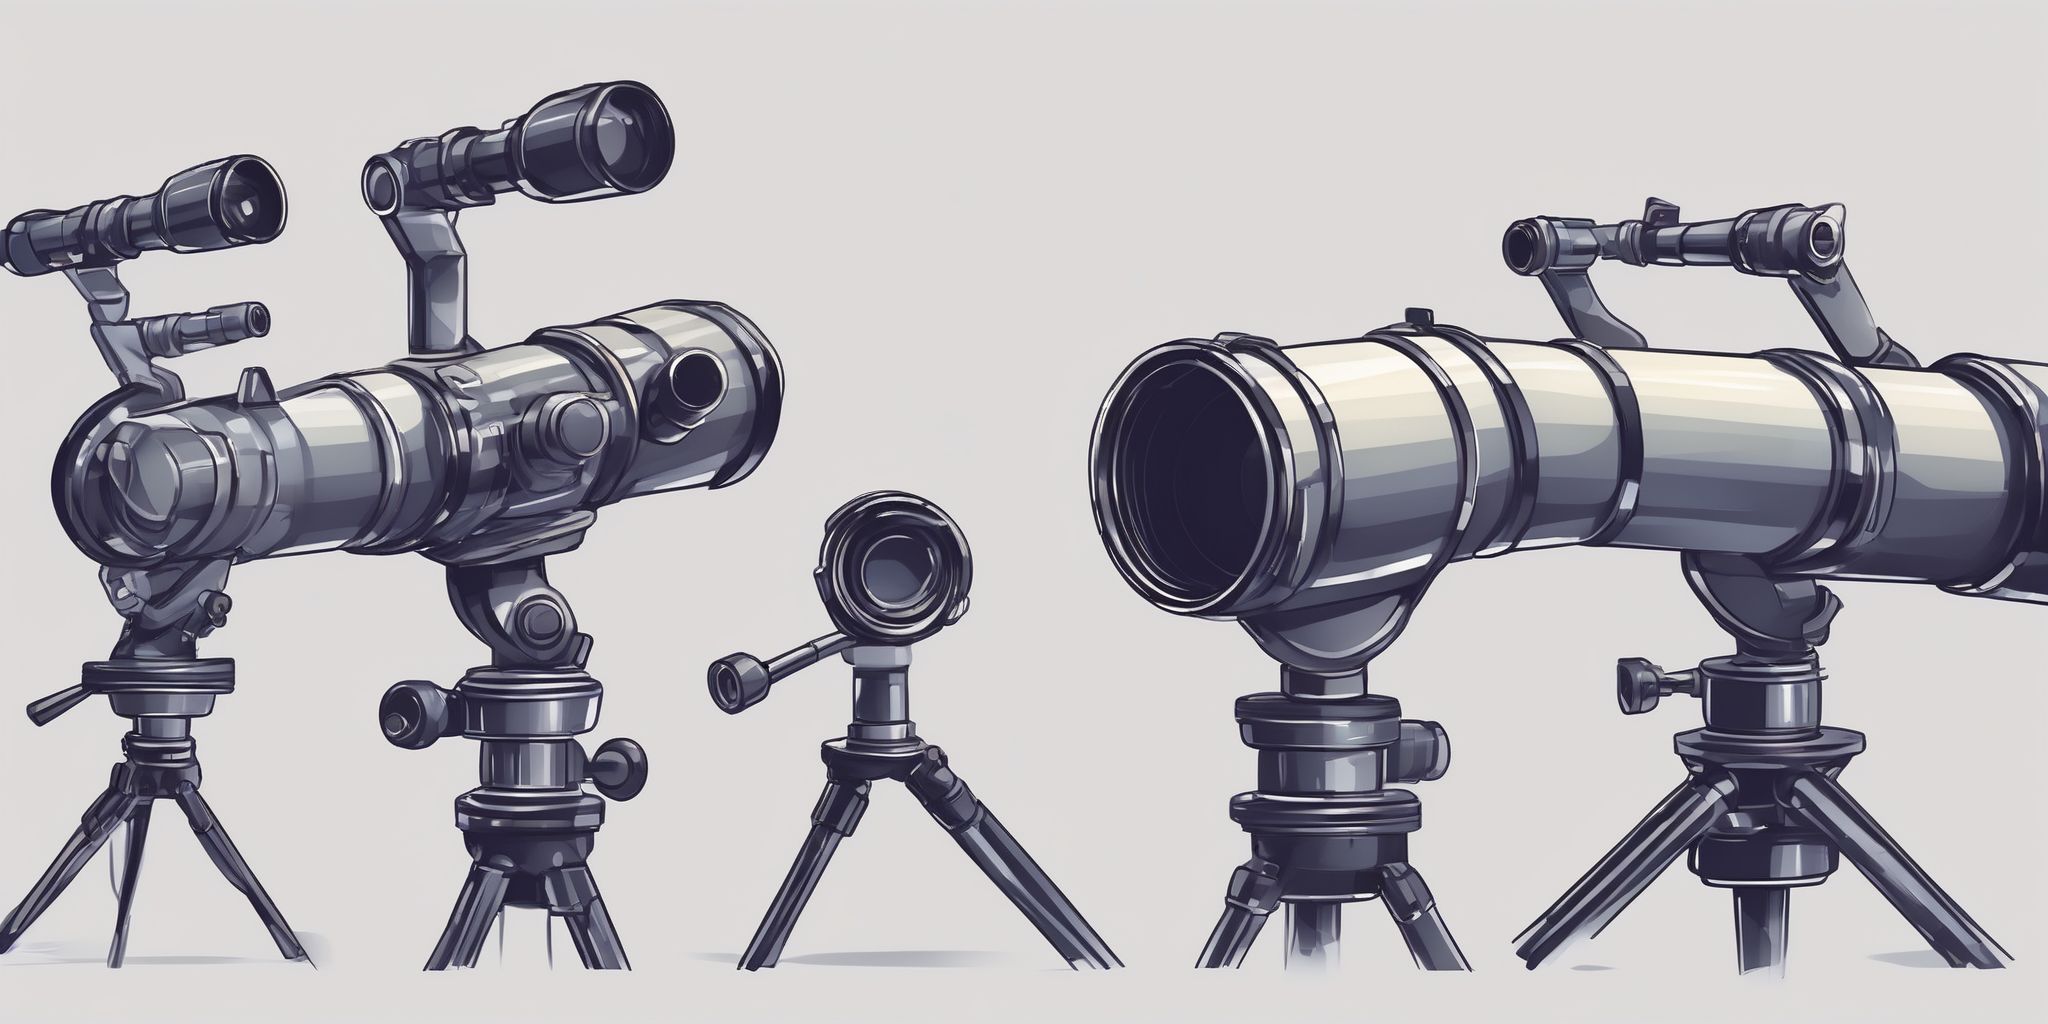 telescope in illustration style with gradients and white background